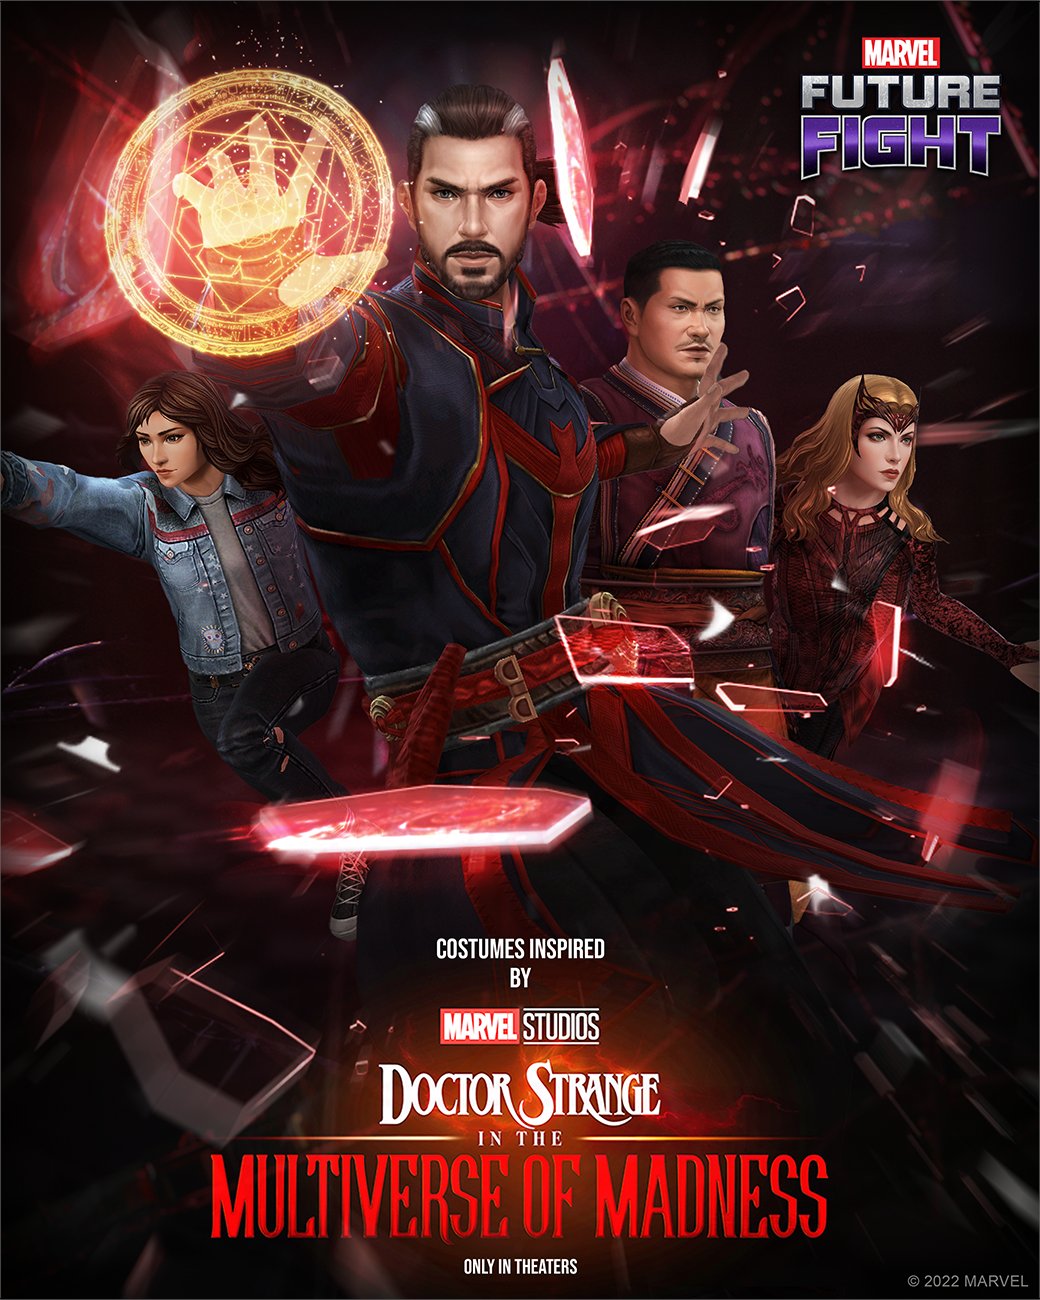 Marvel Future Fight this exclusive MARVEL Future Fight wallpaper featuring Uniforms from Marvel Studios' Doctor Strange in the Multiverse of Madness #MarvelFutureFight